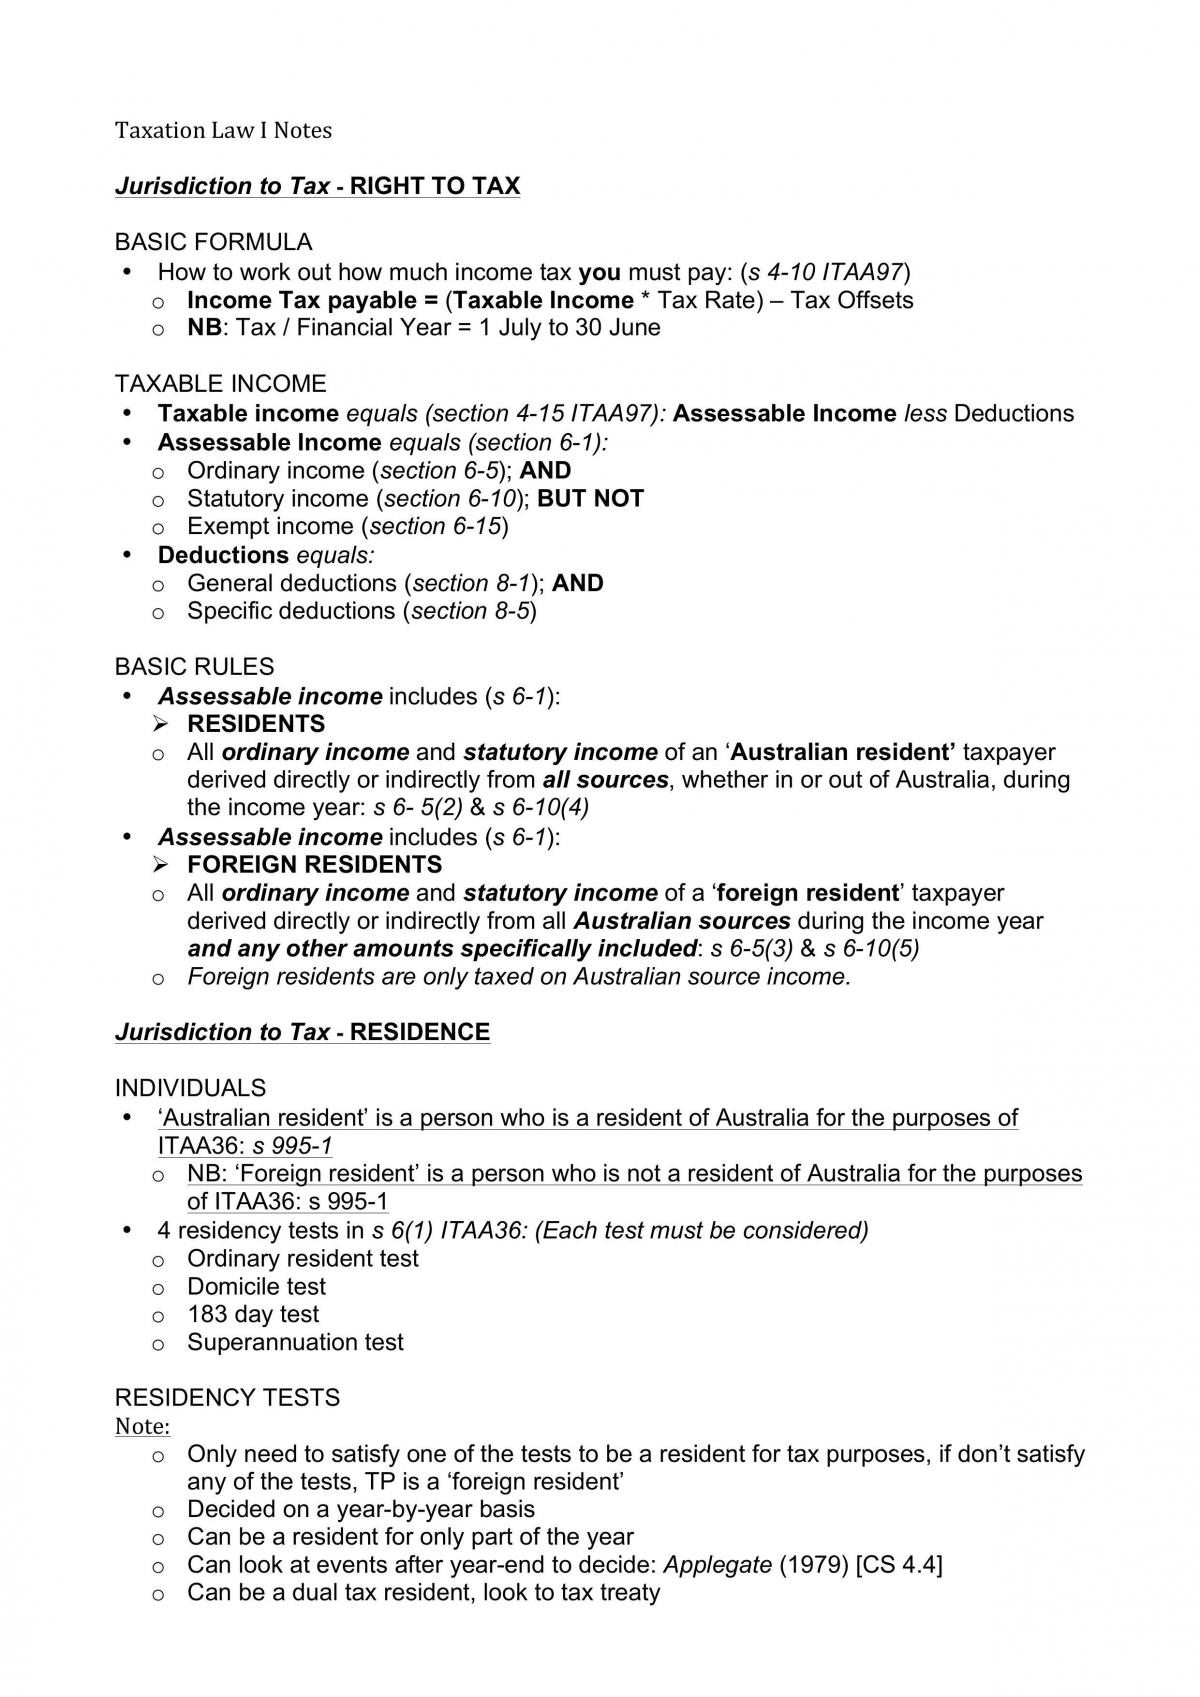 Subject Notes for BLAW30002 Taxation Law I - Page 1